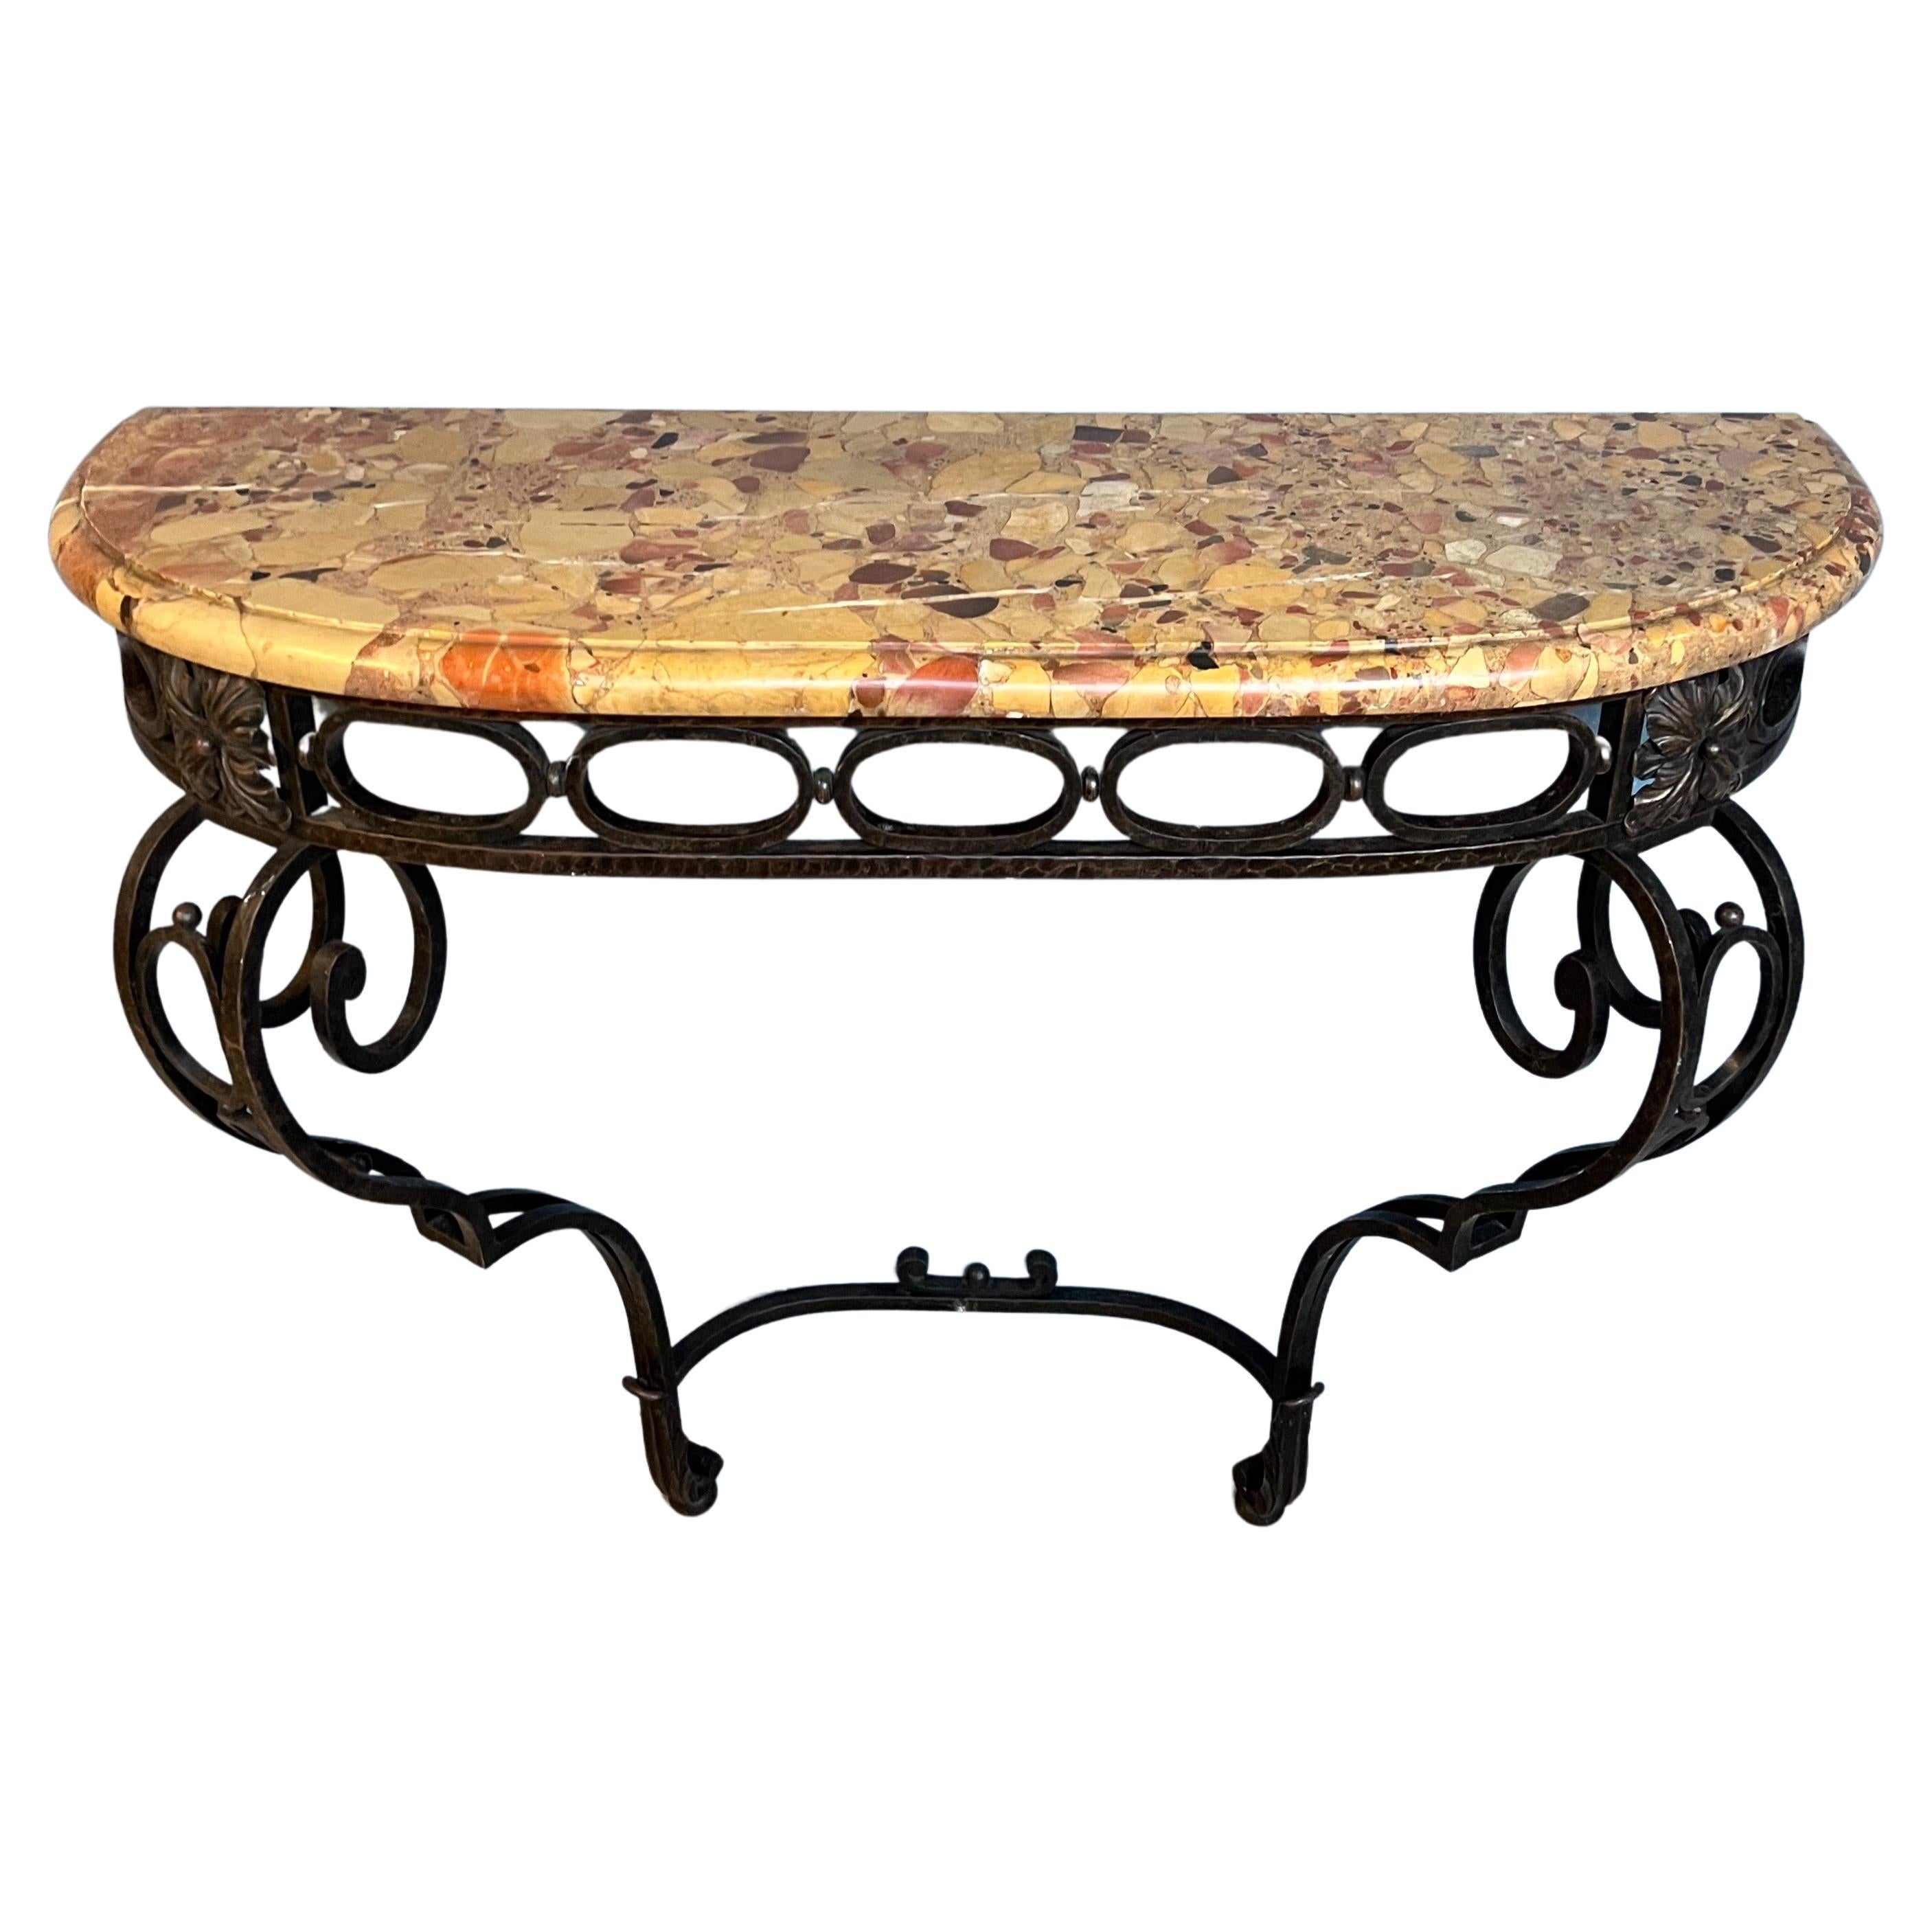 French 1920's Wrought Iron Console with Marble Top